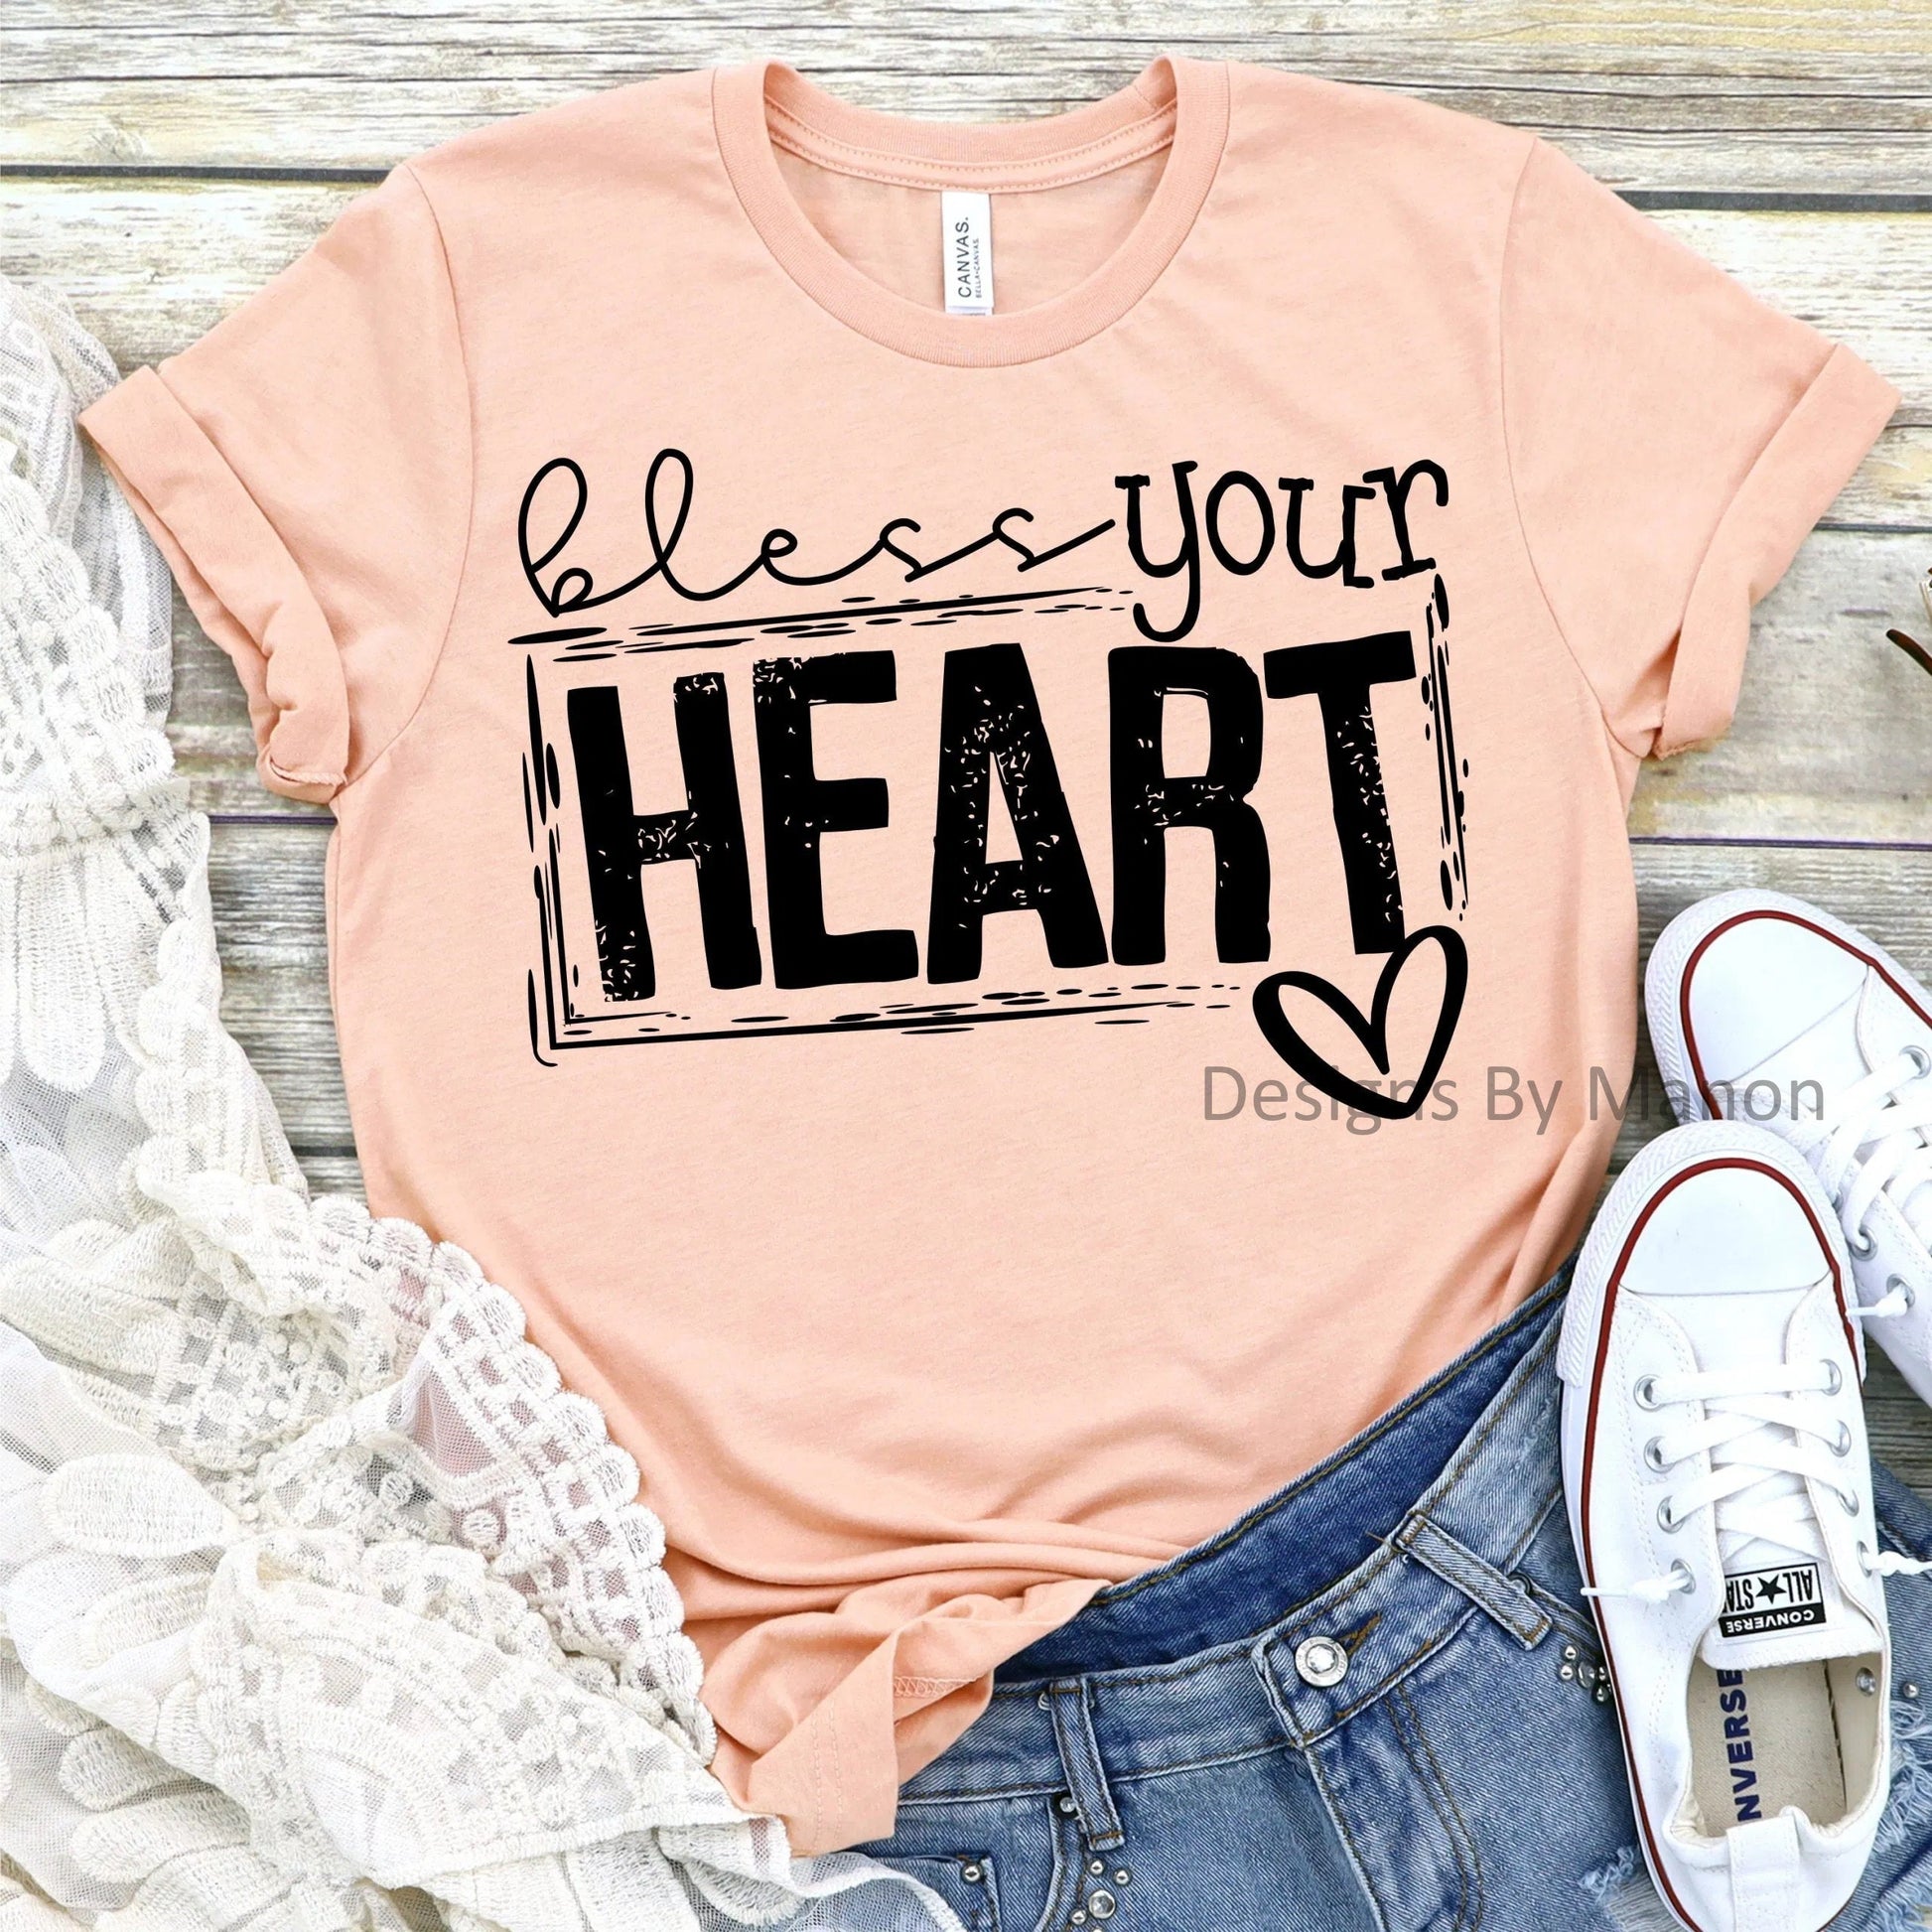 Bless Your Heart Funny Southern Shirt Humorous Tee Unisex Bella Novelty T-Shirt